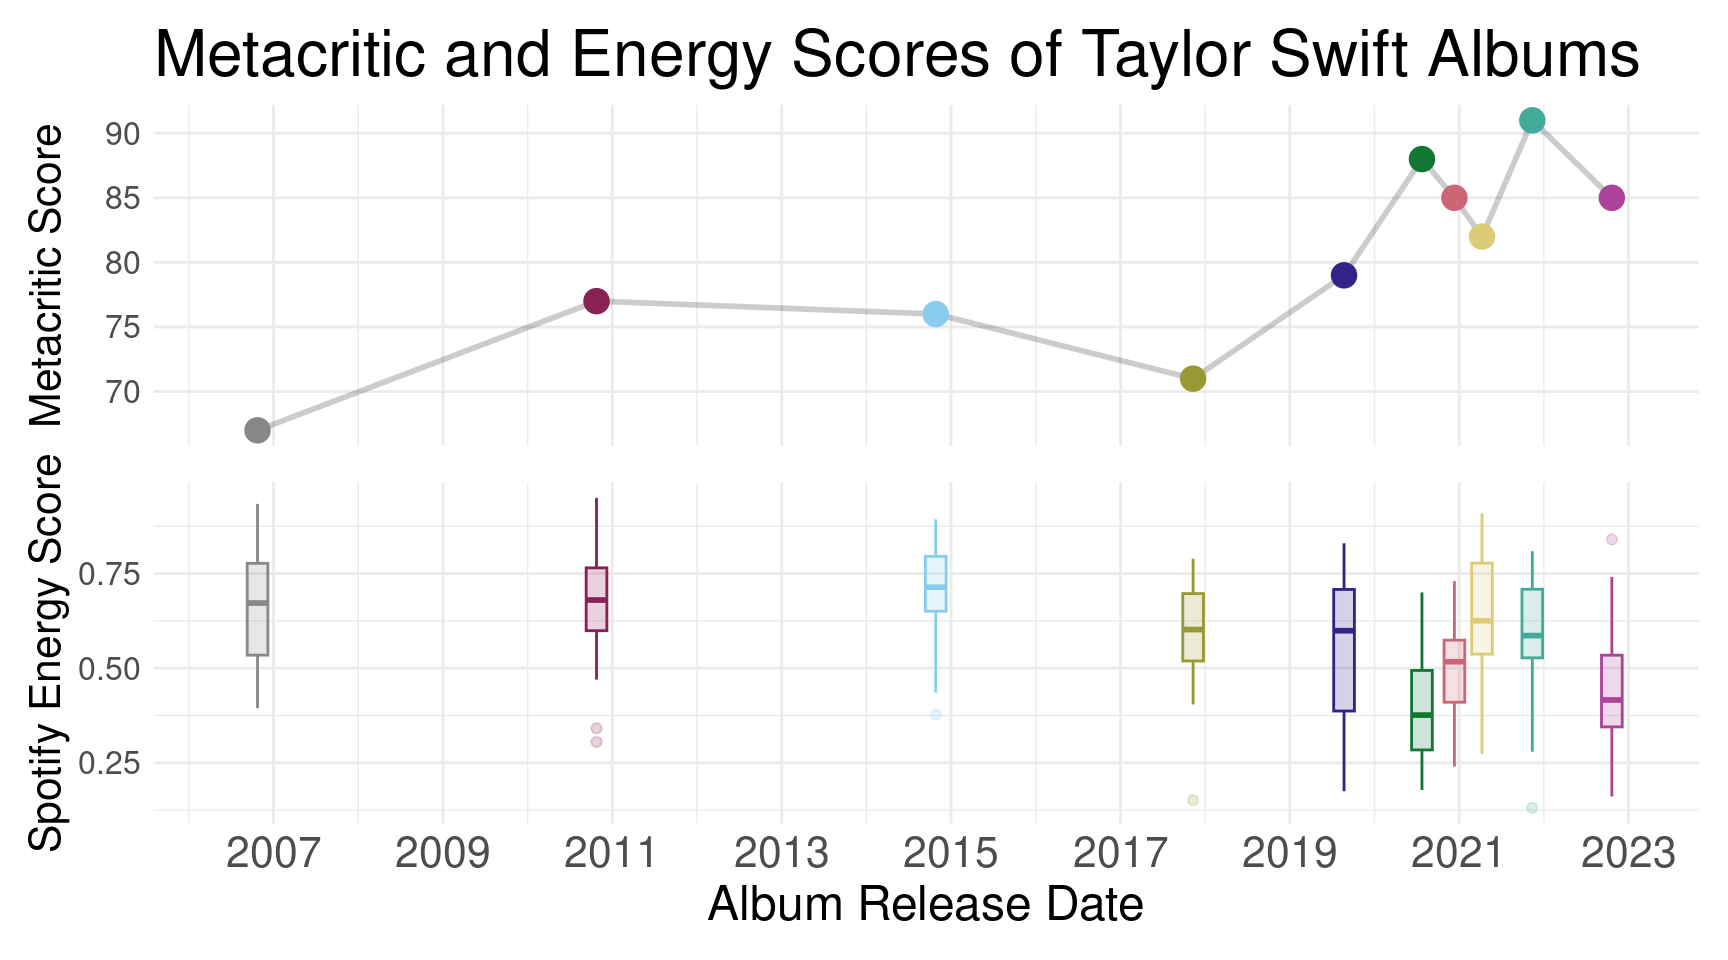 The plot is titled Metacritic and Energy Scores of taylor swift albums. It is a combination of two plots. The top plot is a line plot showing critic scores of taylor swift albums by release date over time from 2006 to 2023. The overall trend is an increase in critical scores over time with a sharp increase beginning in 2017. The bottom plot has a box plot representing the distribution of song energy scores of each album on its release date. The box plots and line plot are shown on the same time scale so that we can observe that while critical reception of Taylor Swift albums have gone up, energy scores have gone down.